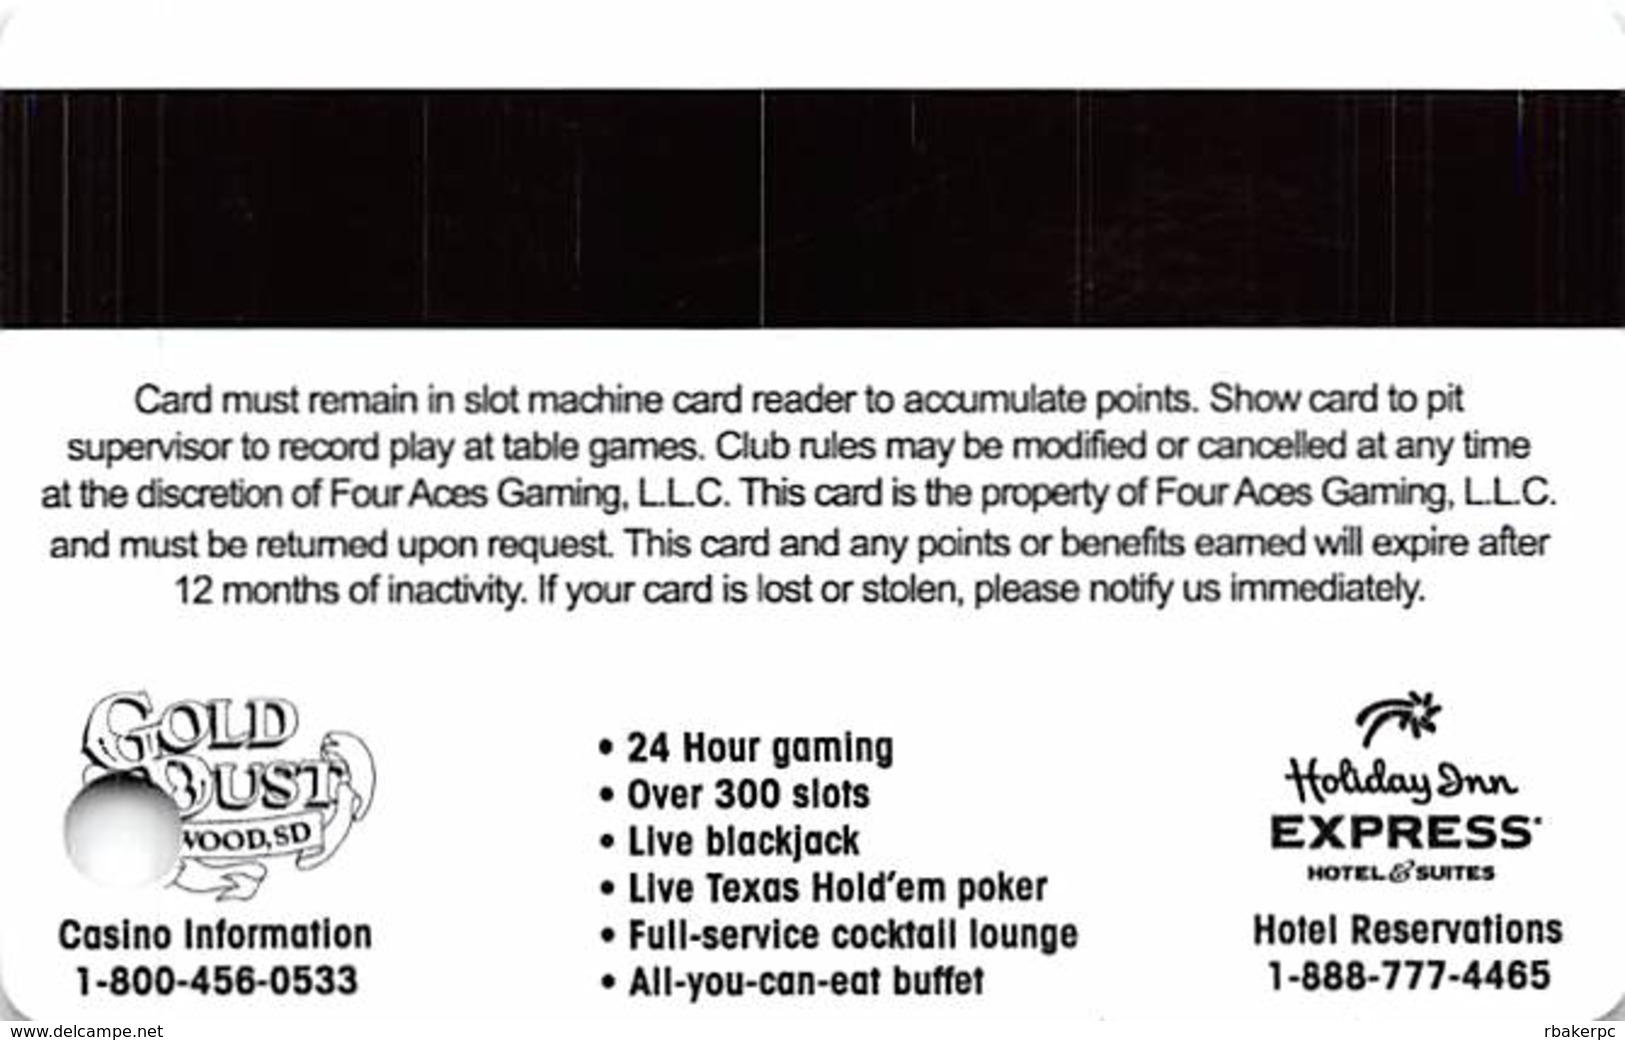 Gold Dust Casino Deadwood, SD - Slot Card - Mentions Expires After 12 Months Of Inactivity - No Mfg Mark - Casino Cards